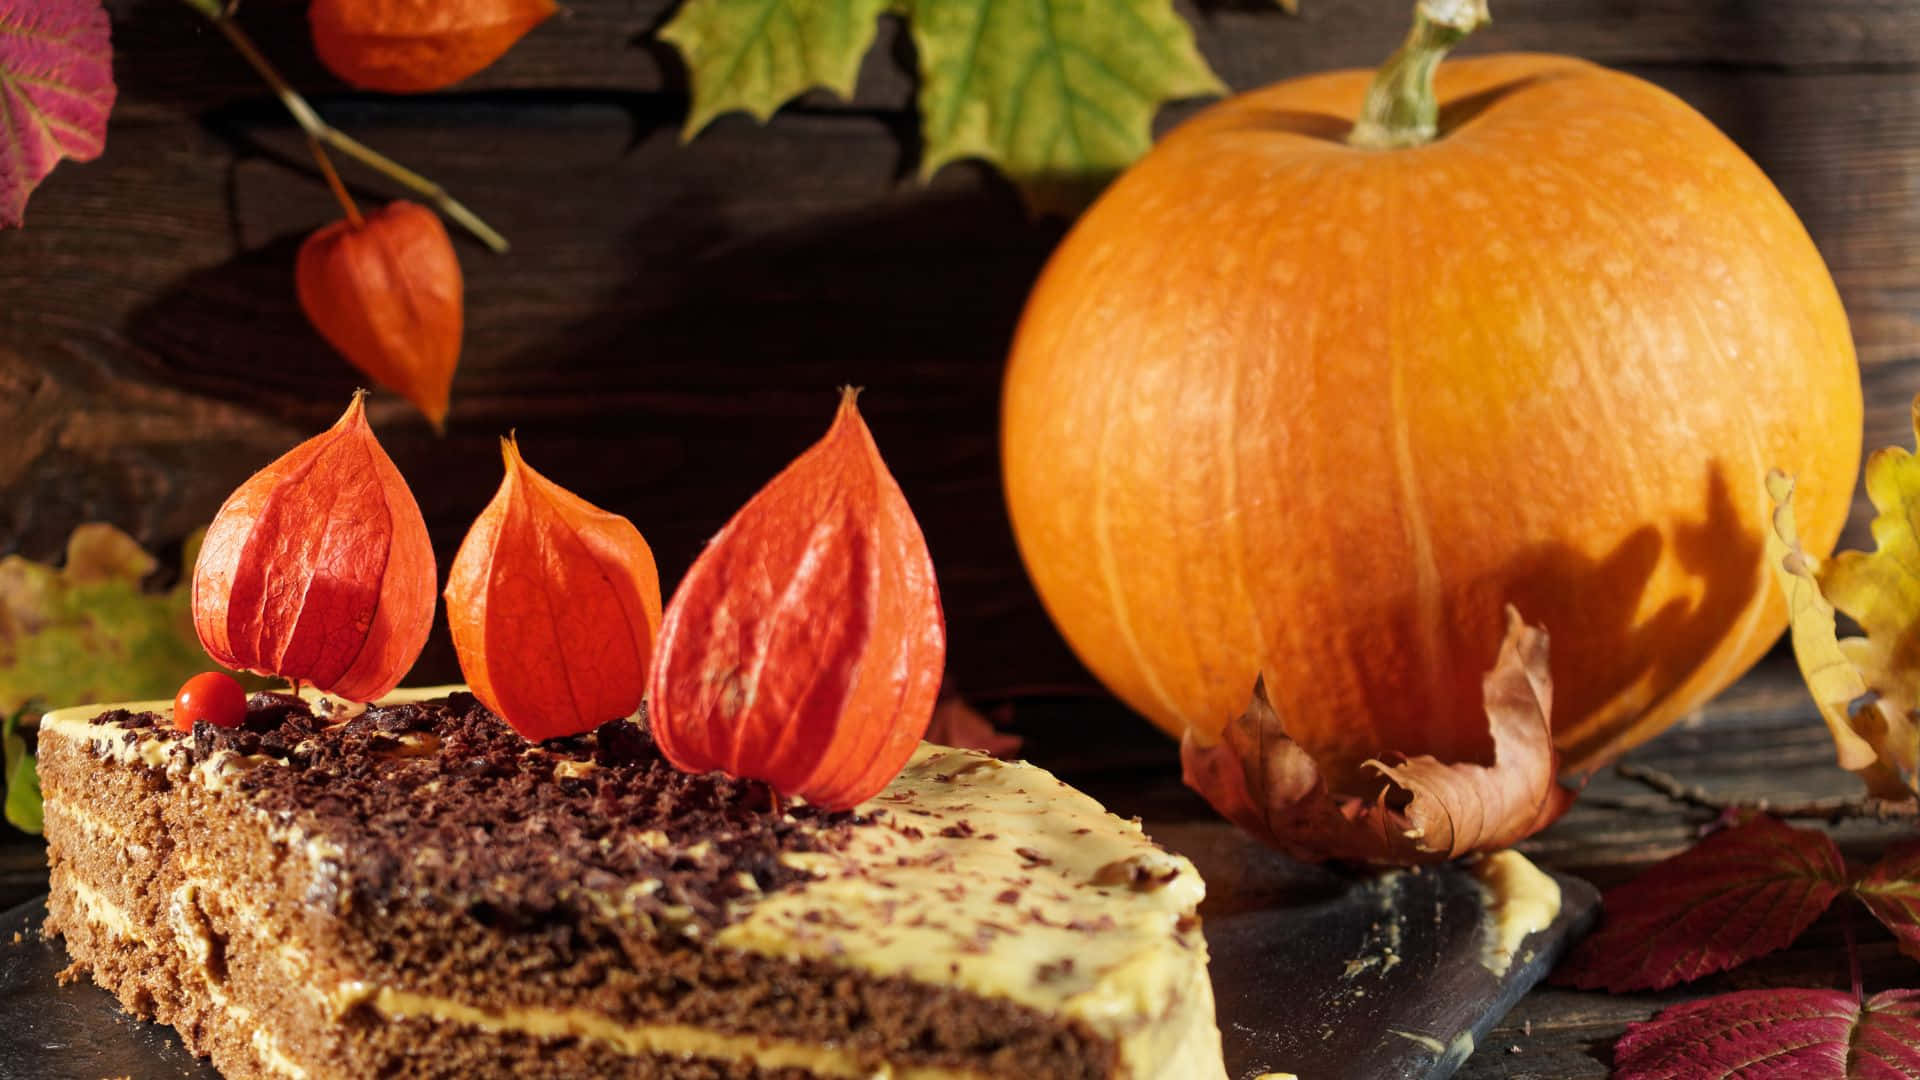 "Enjoy The Sweetest Treat This Halloween With This Delicious Cake!" Wallpaper